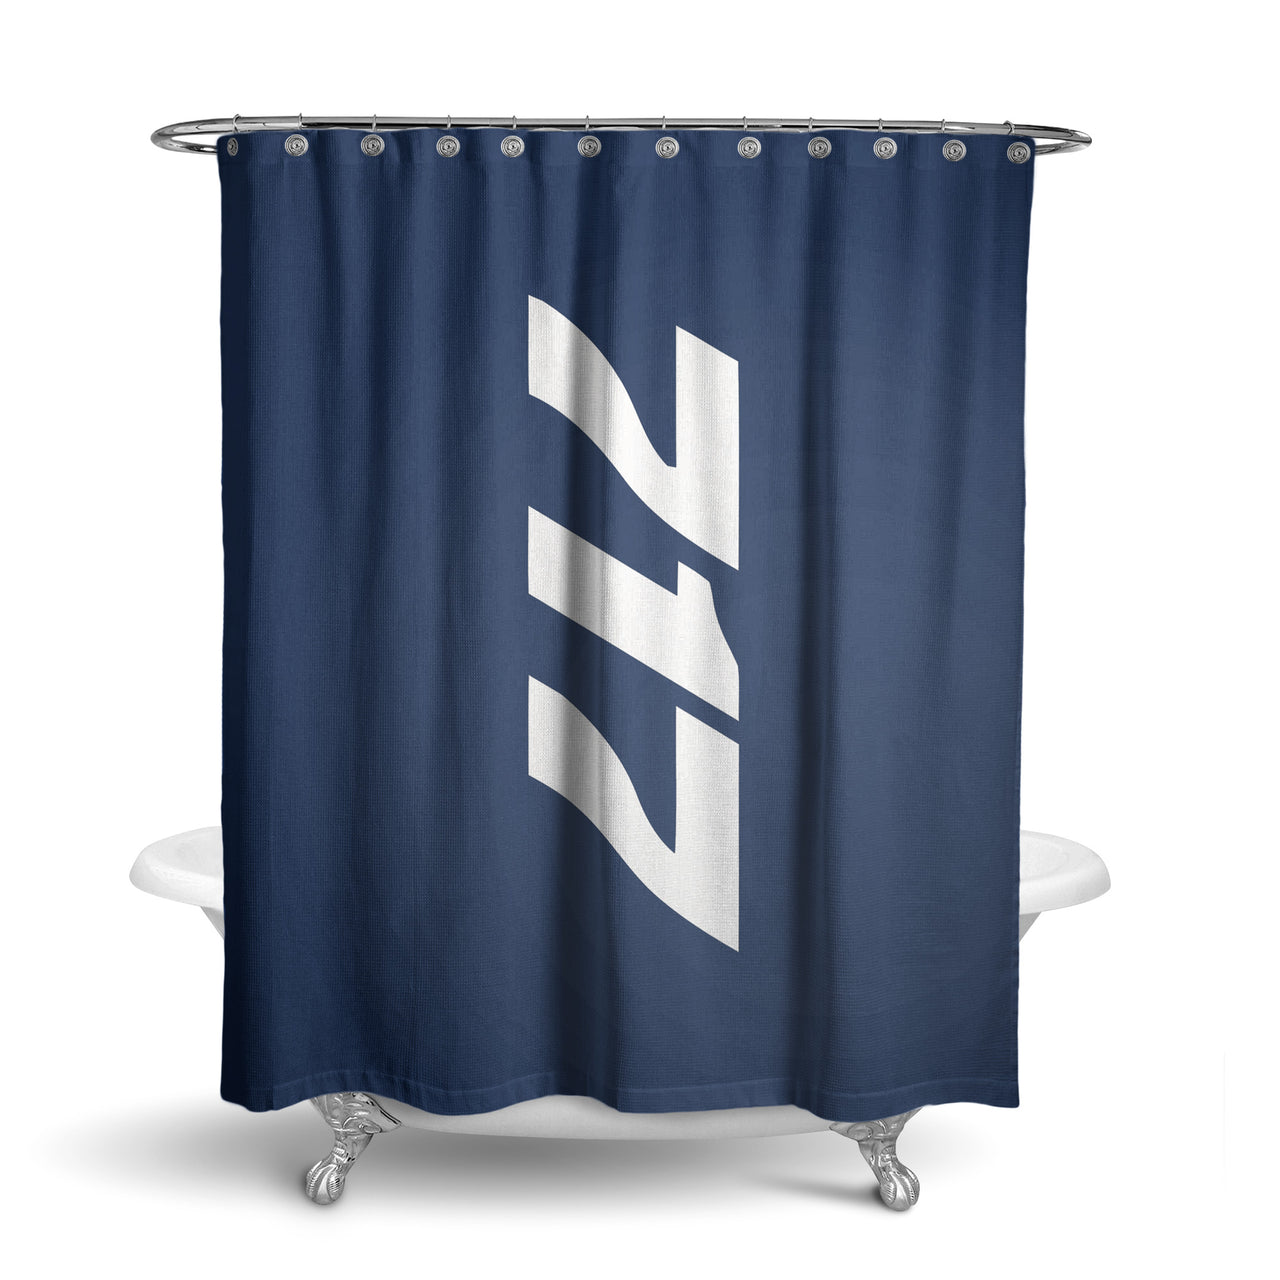 Boeing 717 Text Designed Shower Curtains